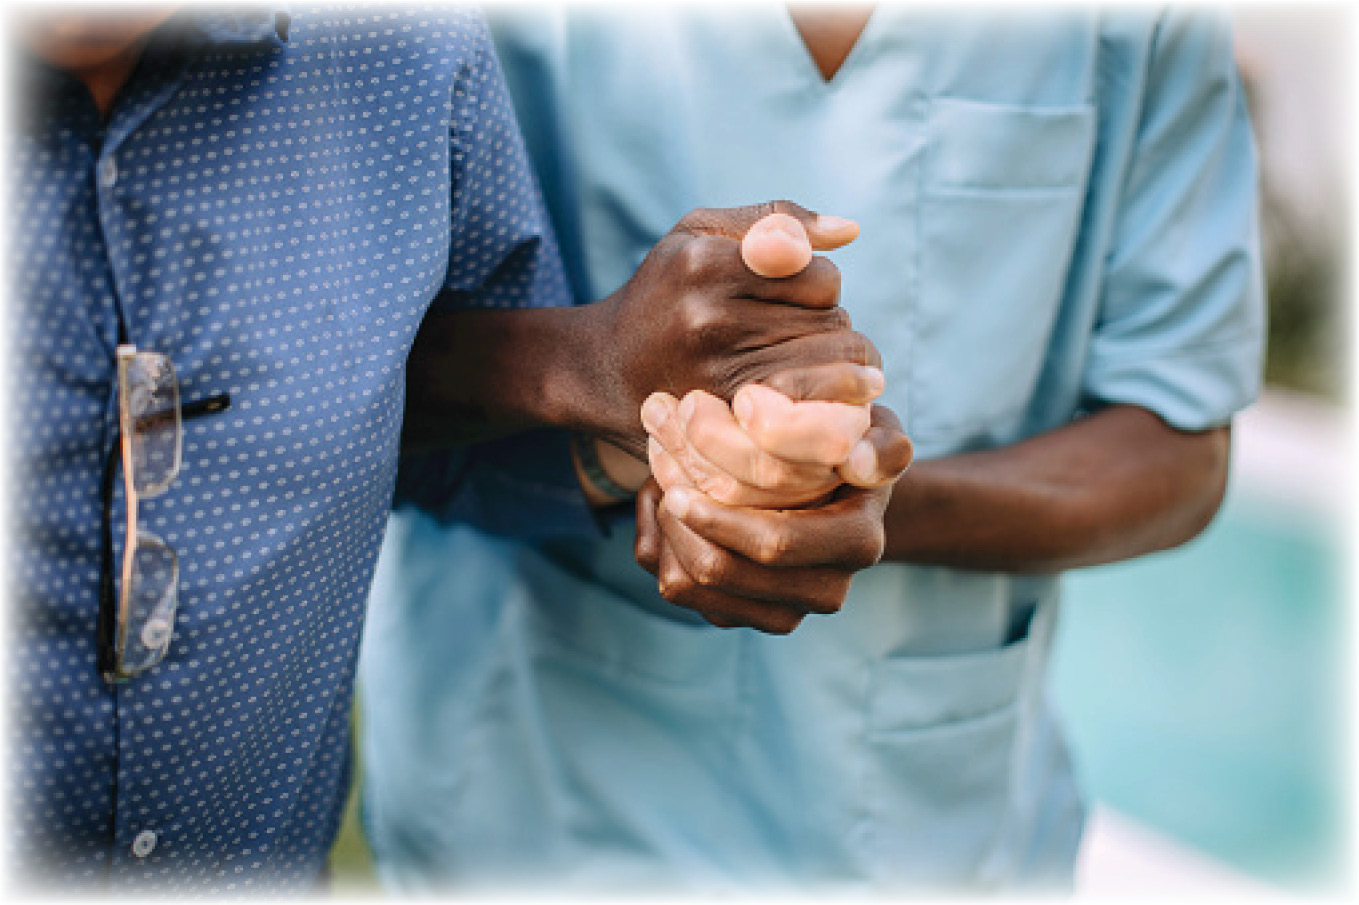 someone in scrubs assisting an elderly man walk with a firm grip on his hand